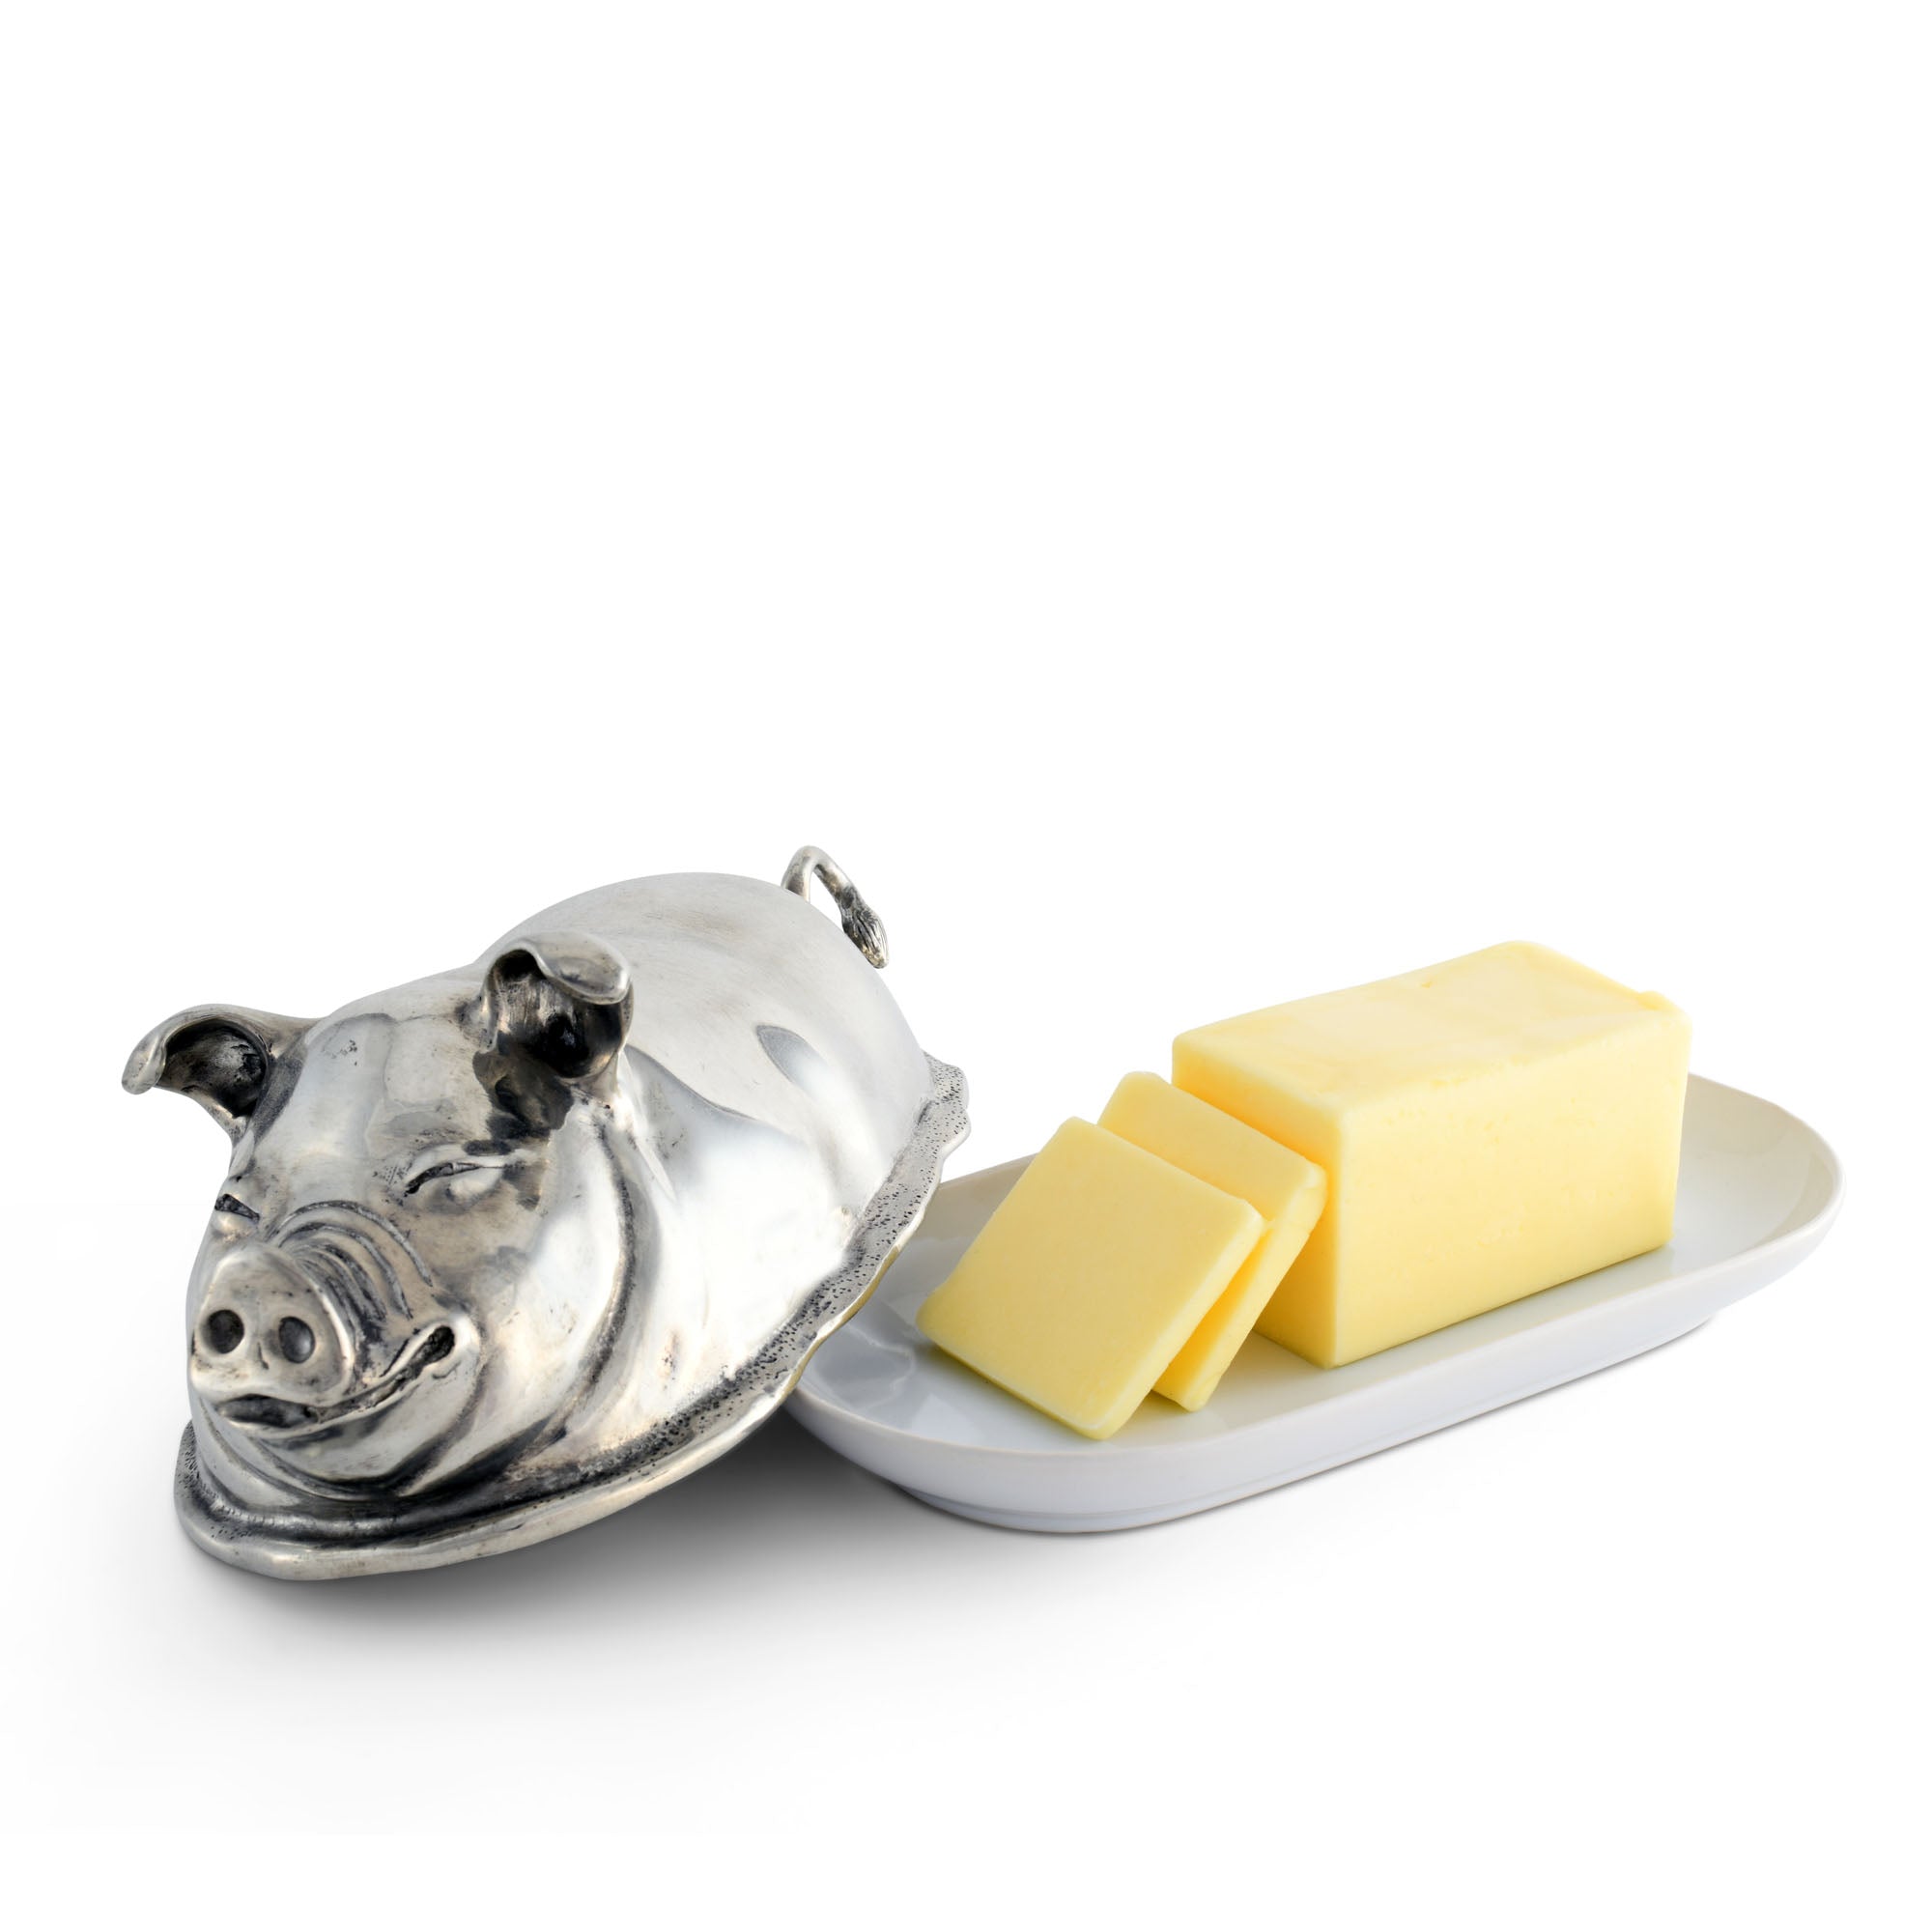 Vagabond House Happy Pig Butter Dish Product Image